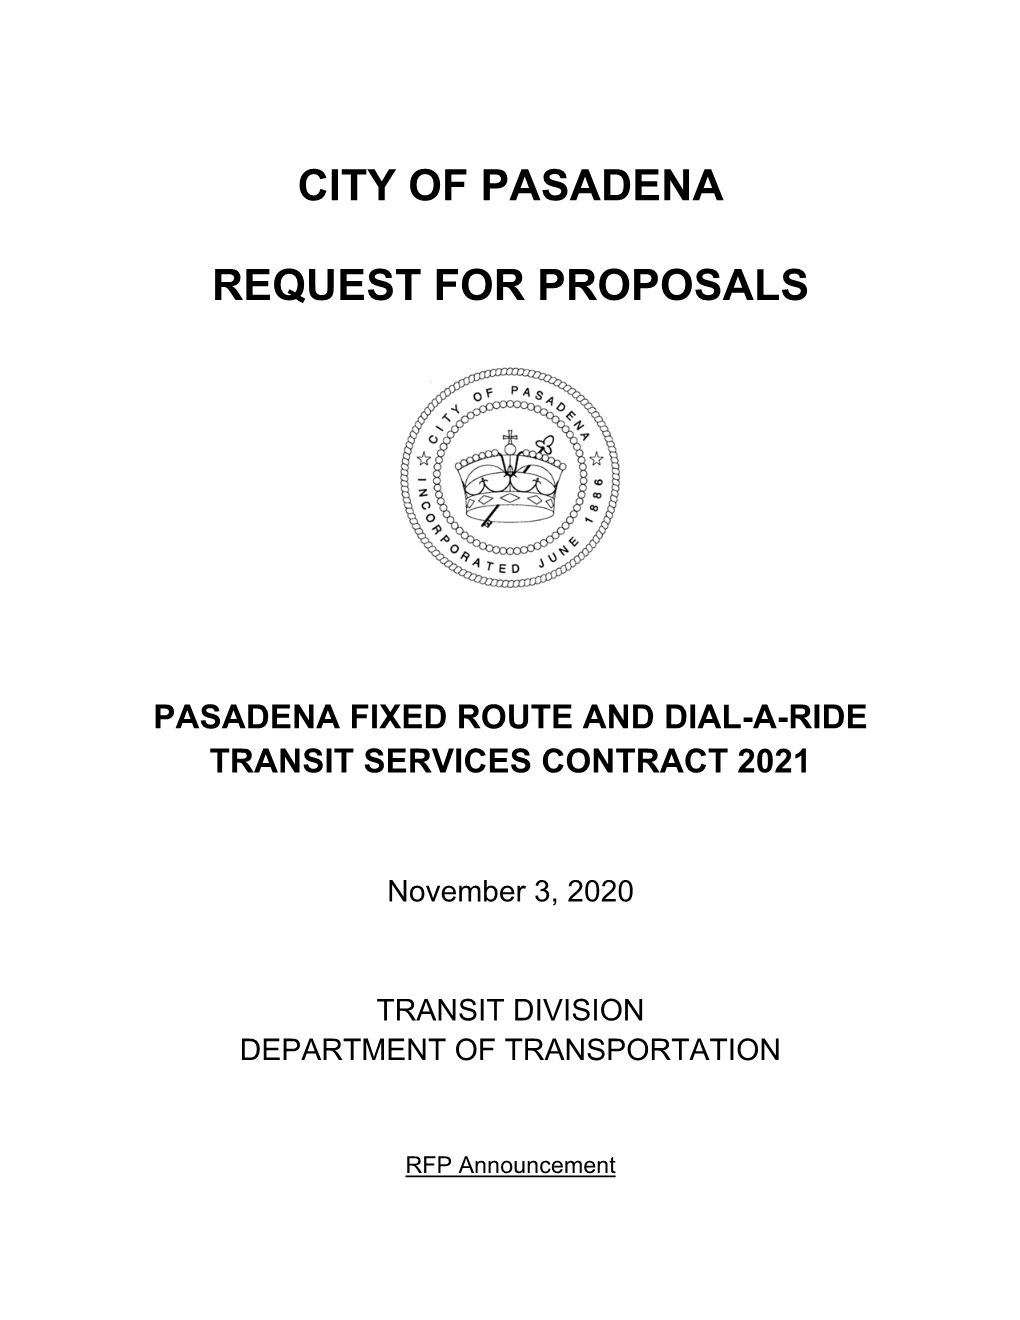 City of Pasadena Request for Proposals (Rfp)